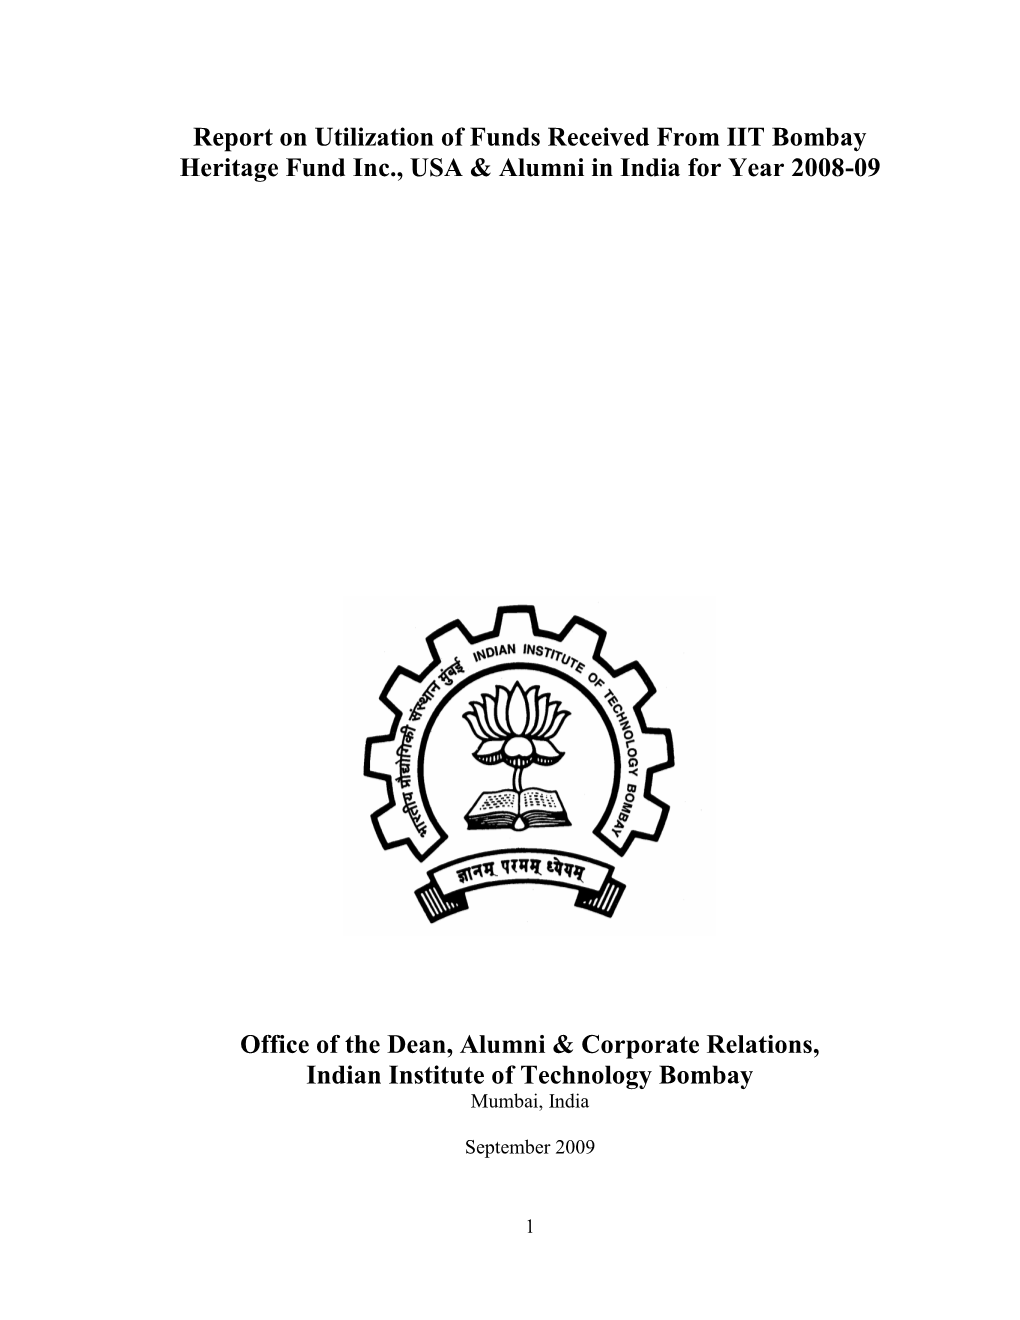 Report on Utilization of Funds Received from IIT Bombay Heritage Fund Inc., USA & Alumni in India for Year 2008-09